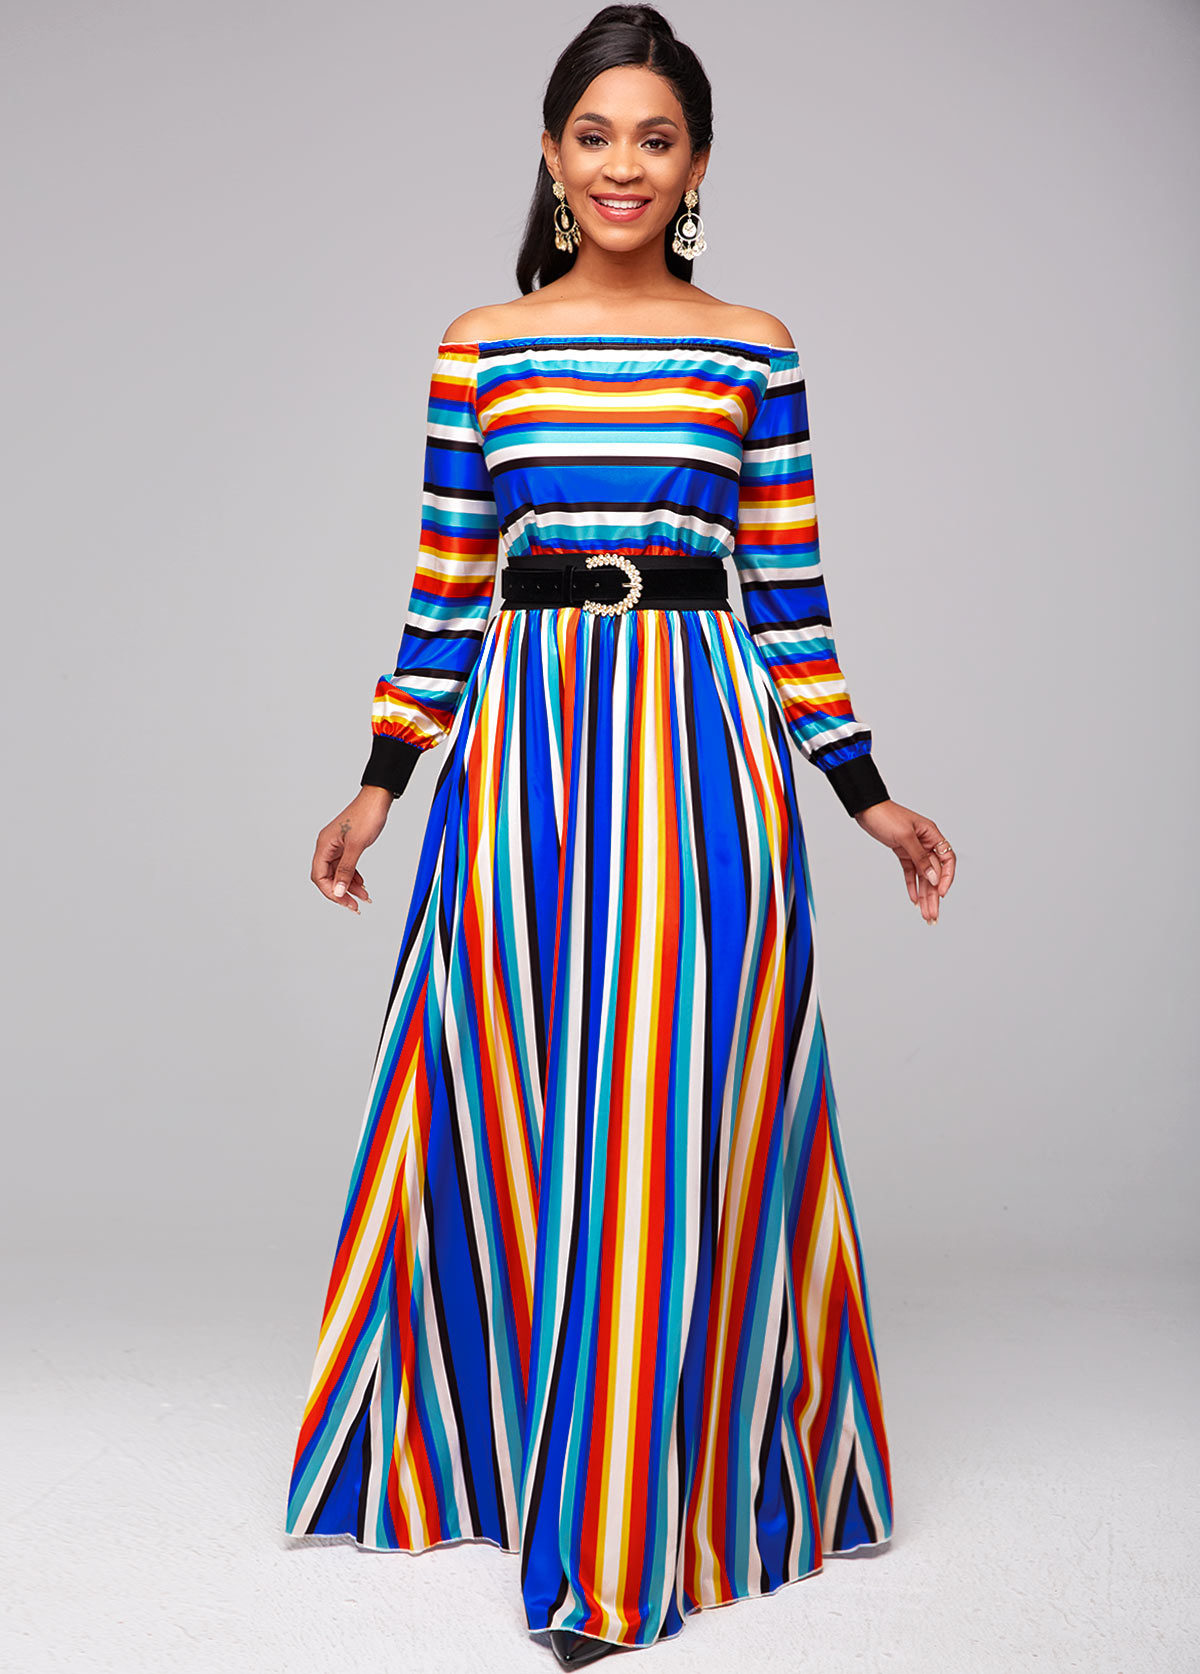 Off Shoulder Top and Rainbow Color Skirt